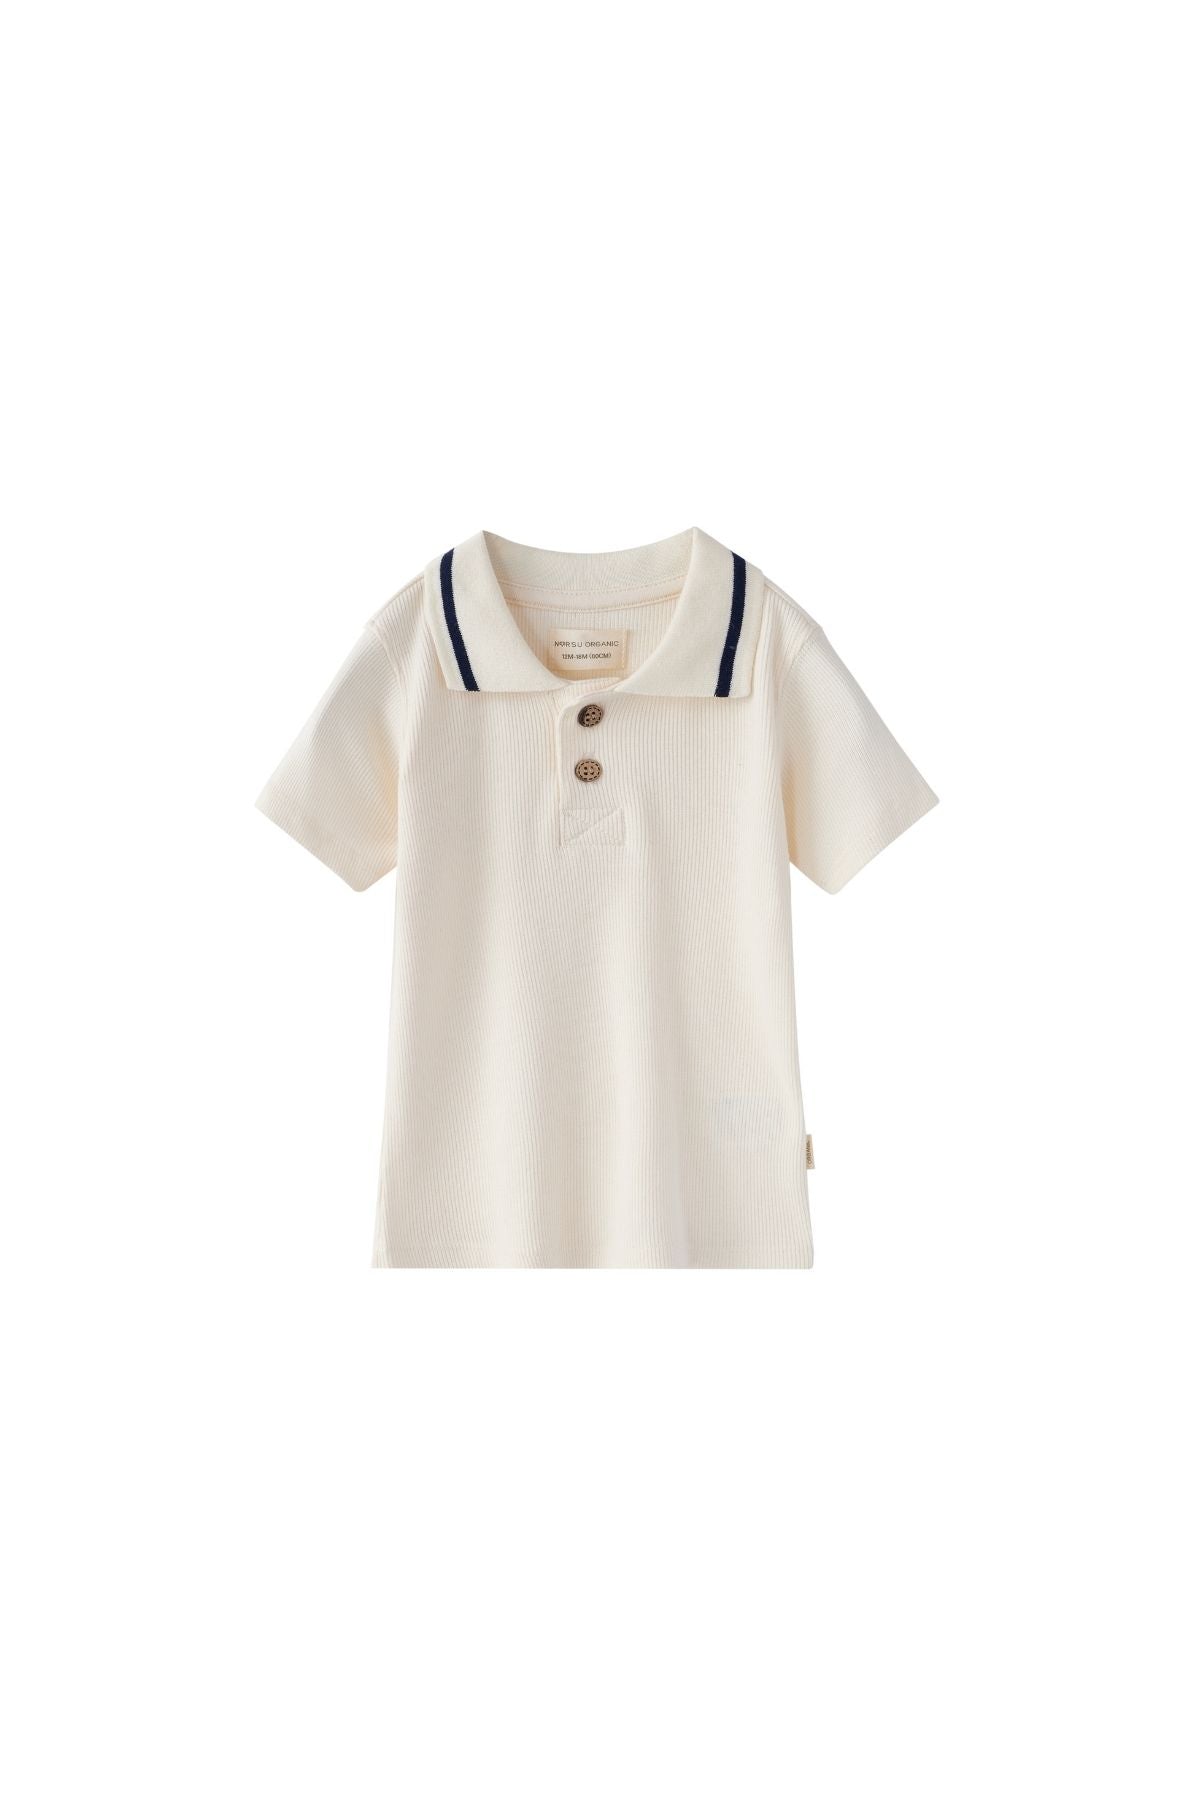 front of Toddler Bamboo Polo Shirt-Antique White